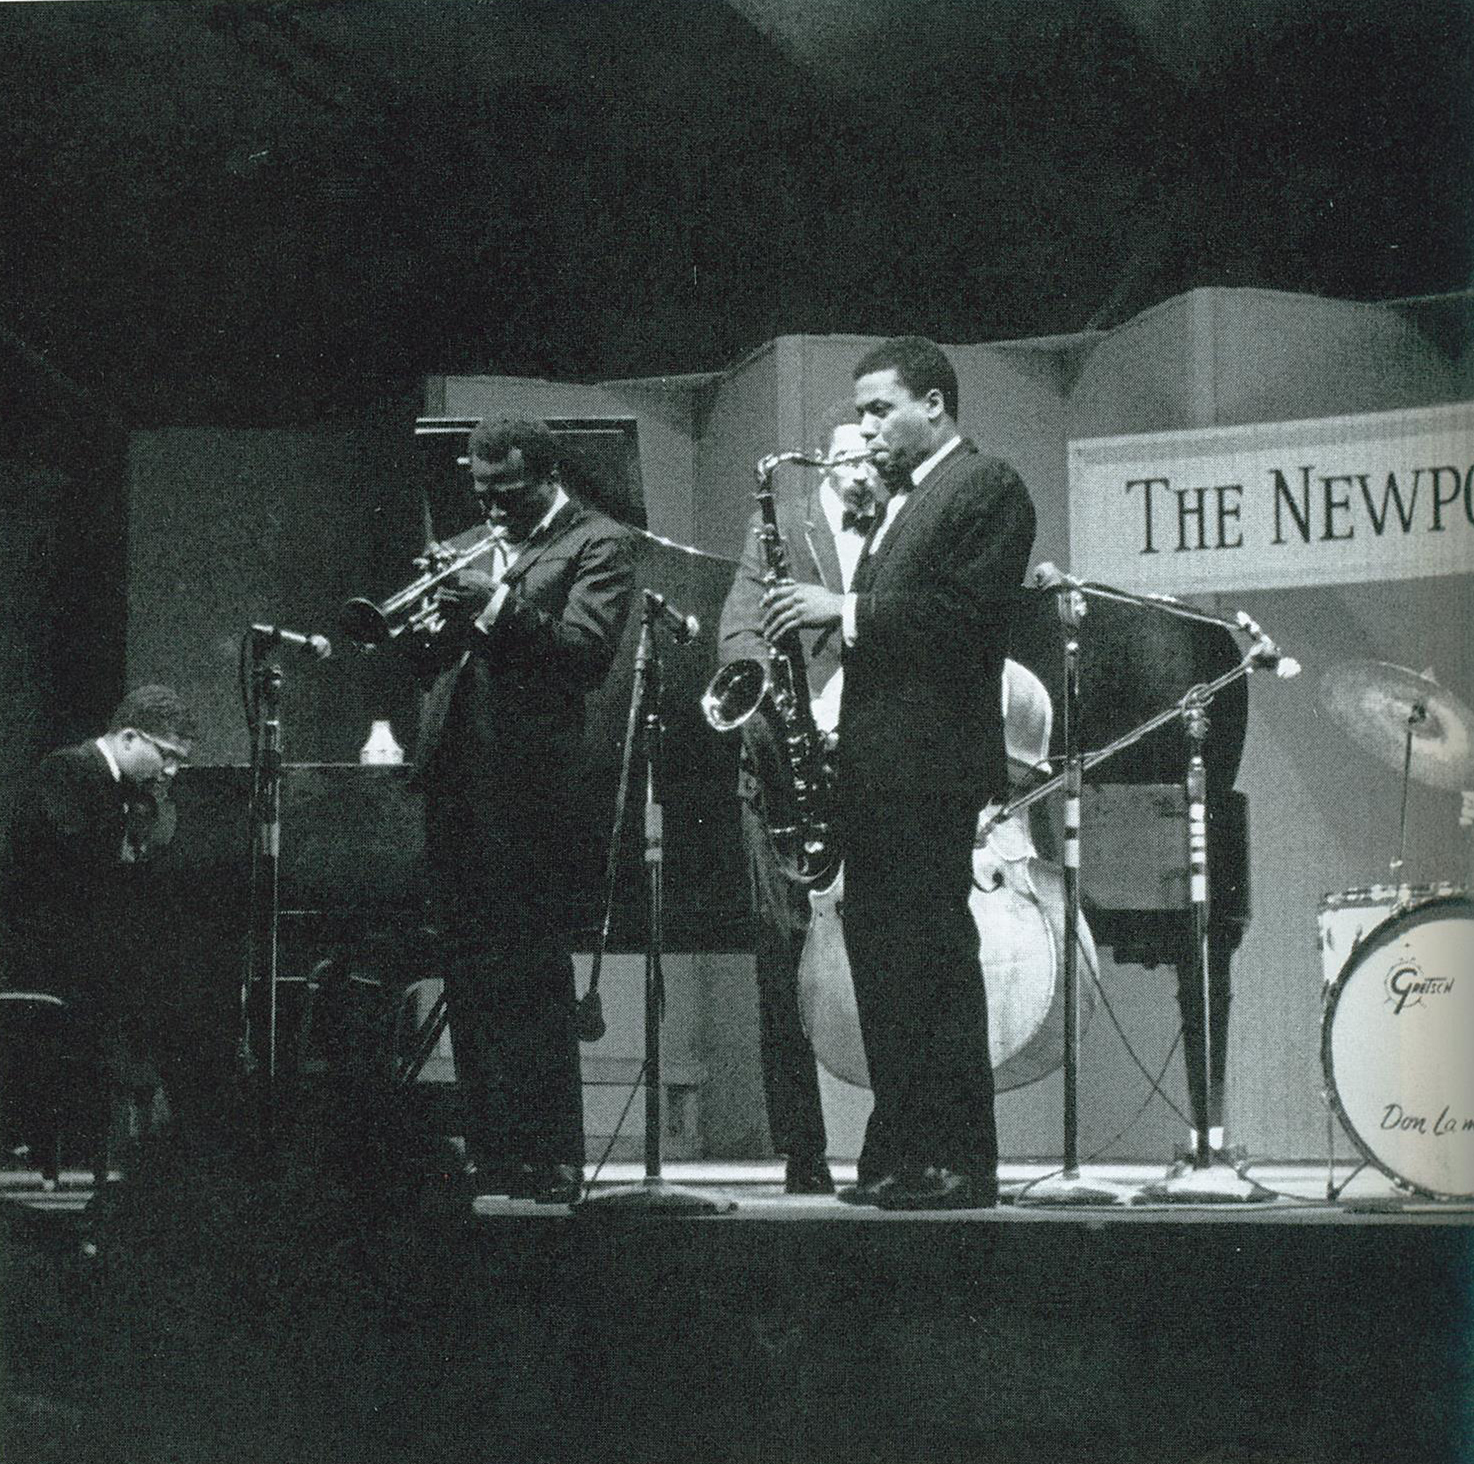 Photo of Miles Davis and others with Herbie Hancock - cropped